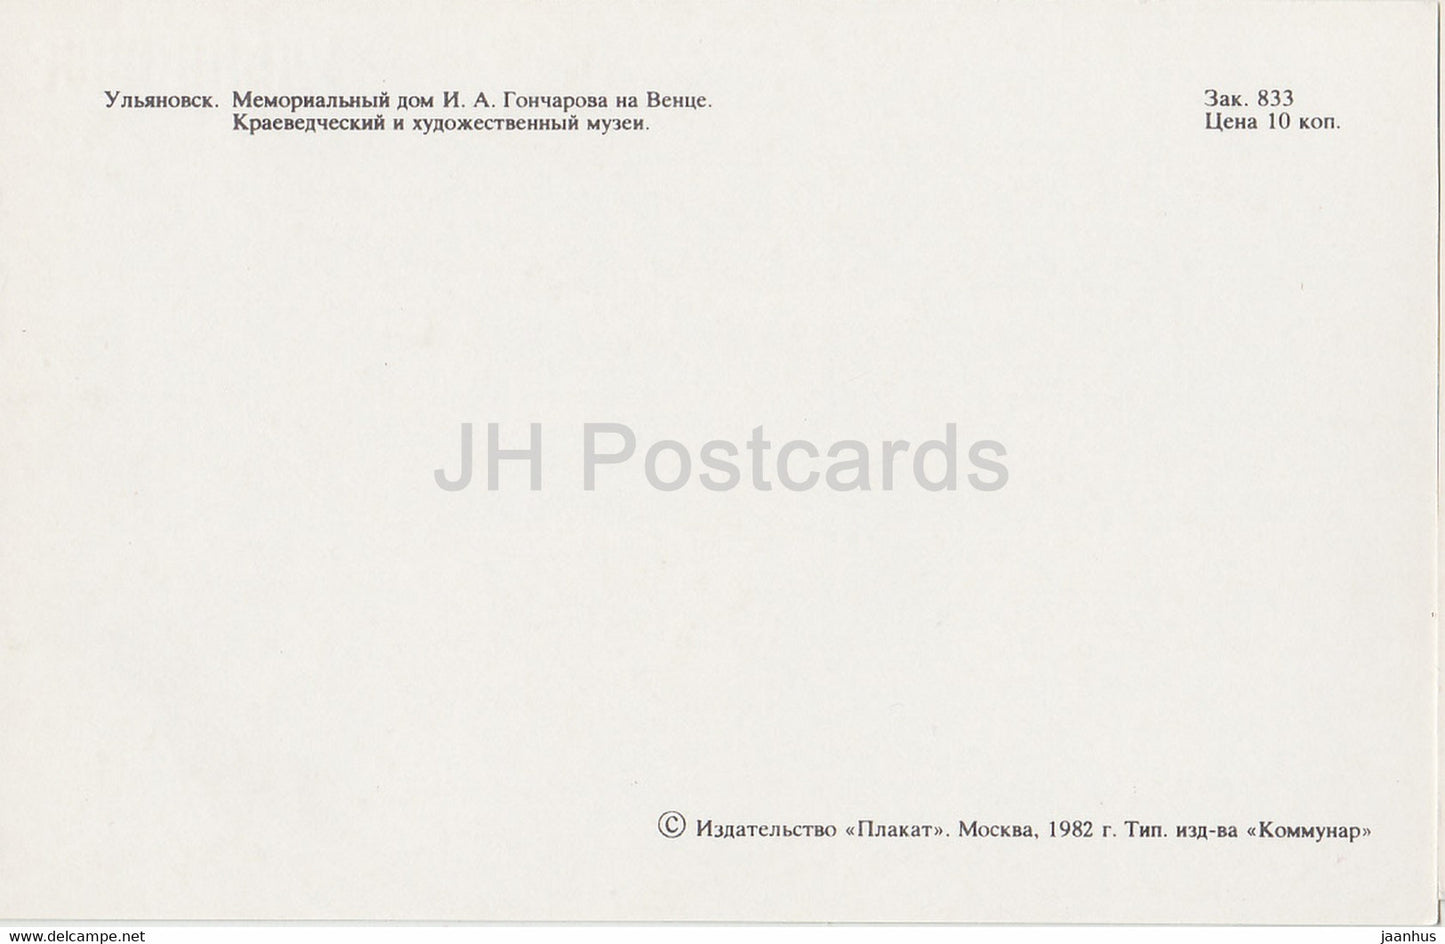 Ulyanovsk - Goncharov Memorial House - Local Lore and Art Museum - 1982 - Russia USSR - unused